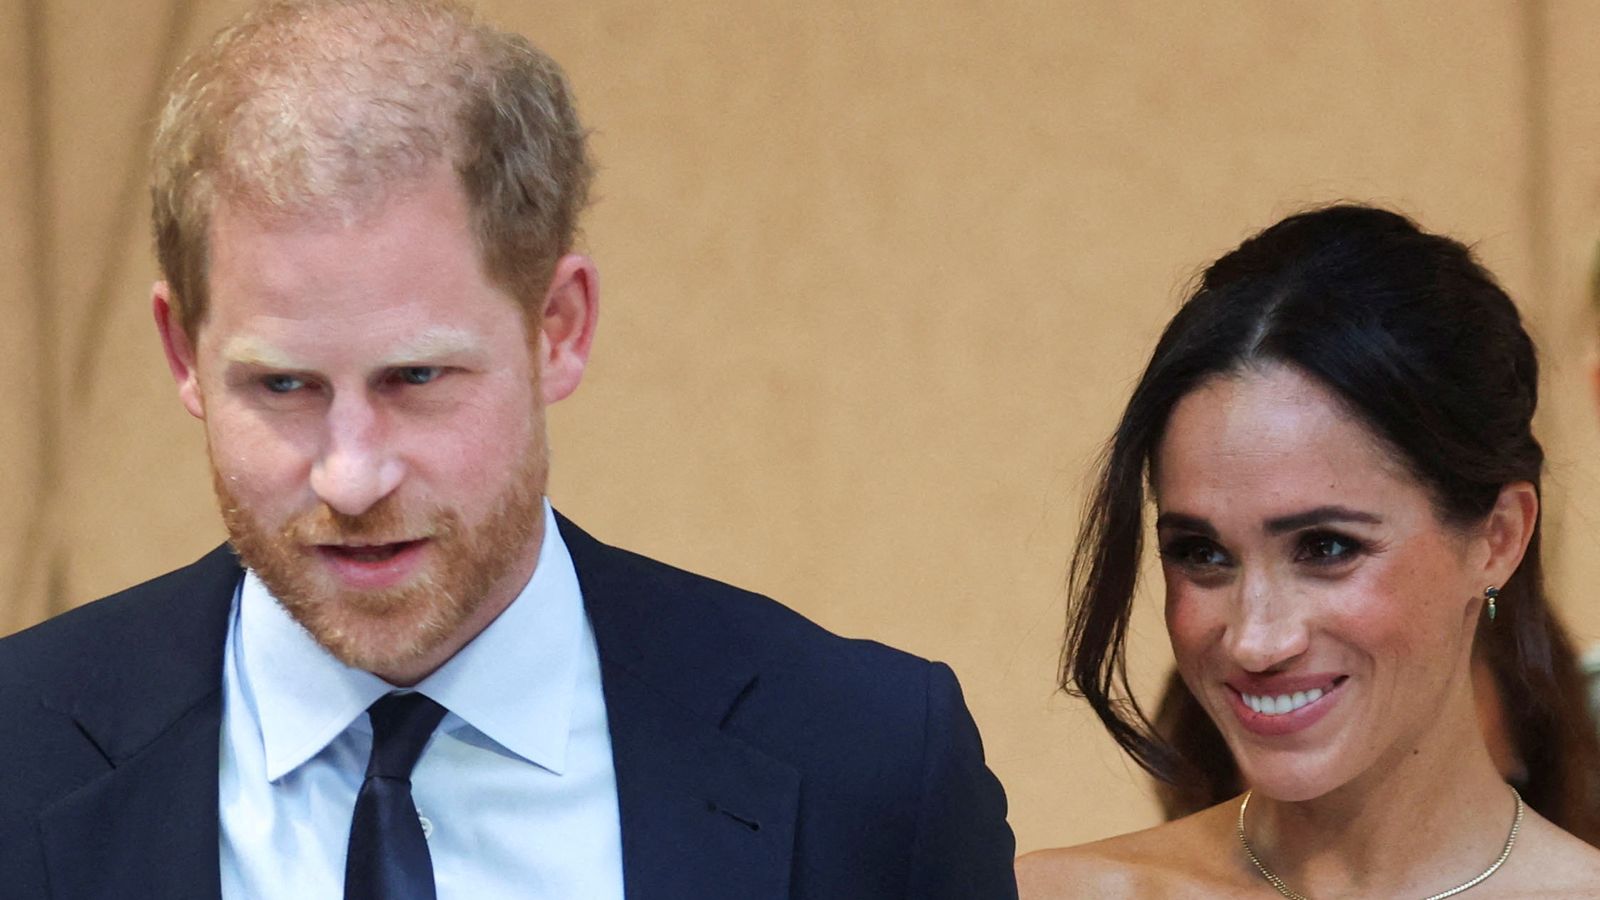 Royal race row 'smear' sparks 'nuclear option' bid at Westminster to strip Harry and Meghan of titles